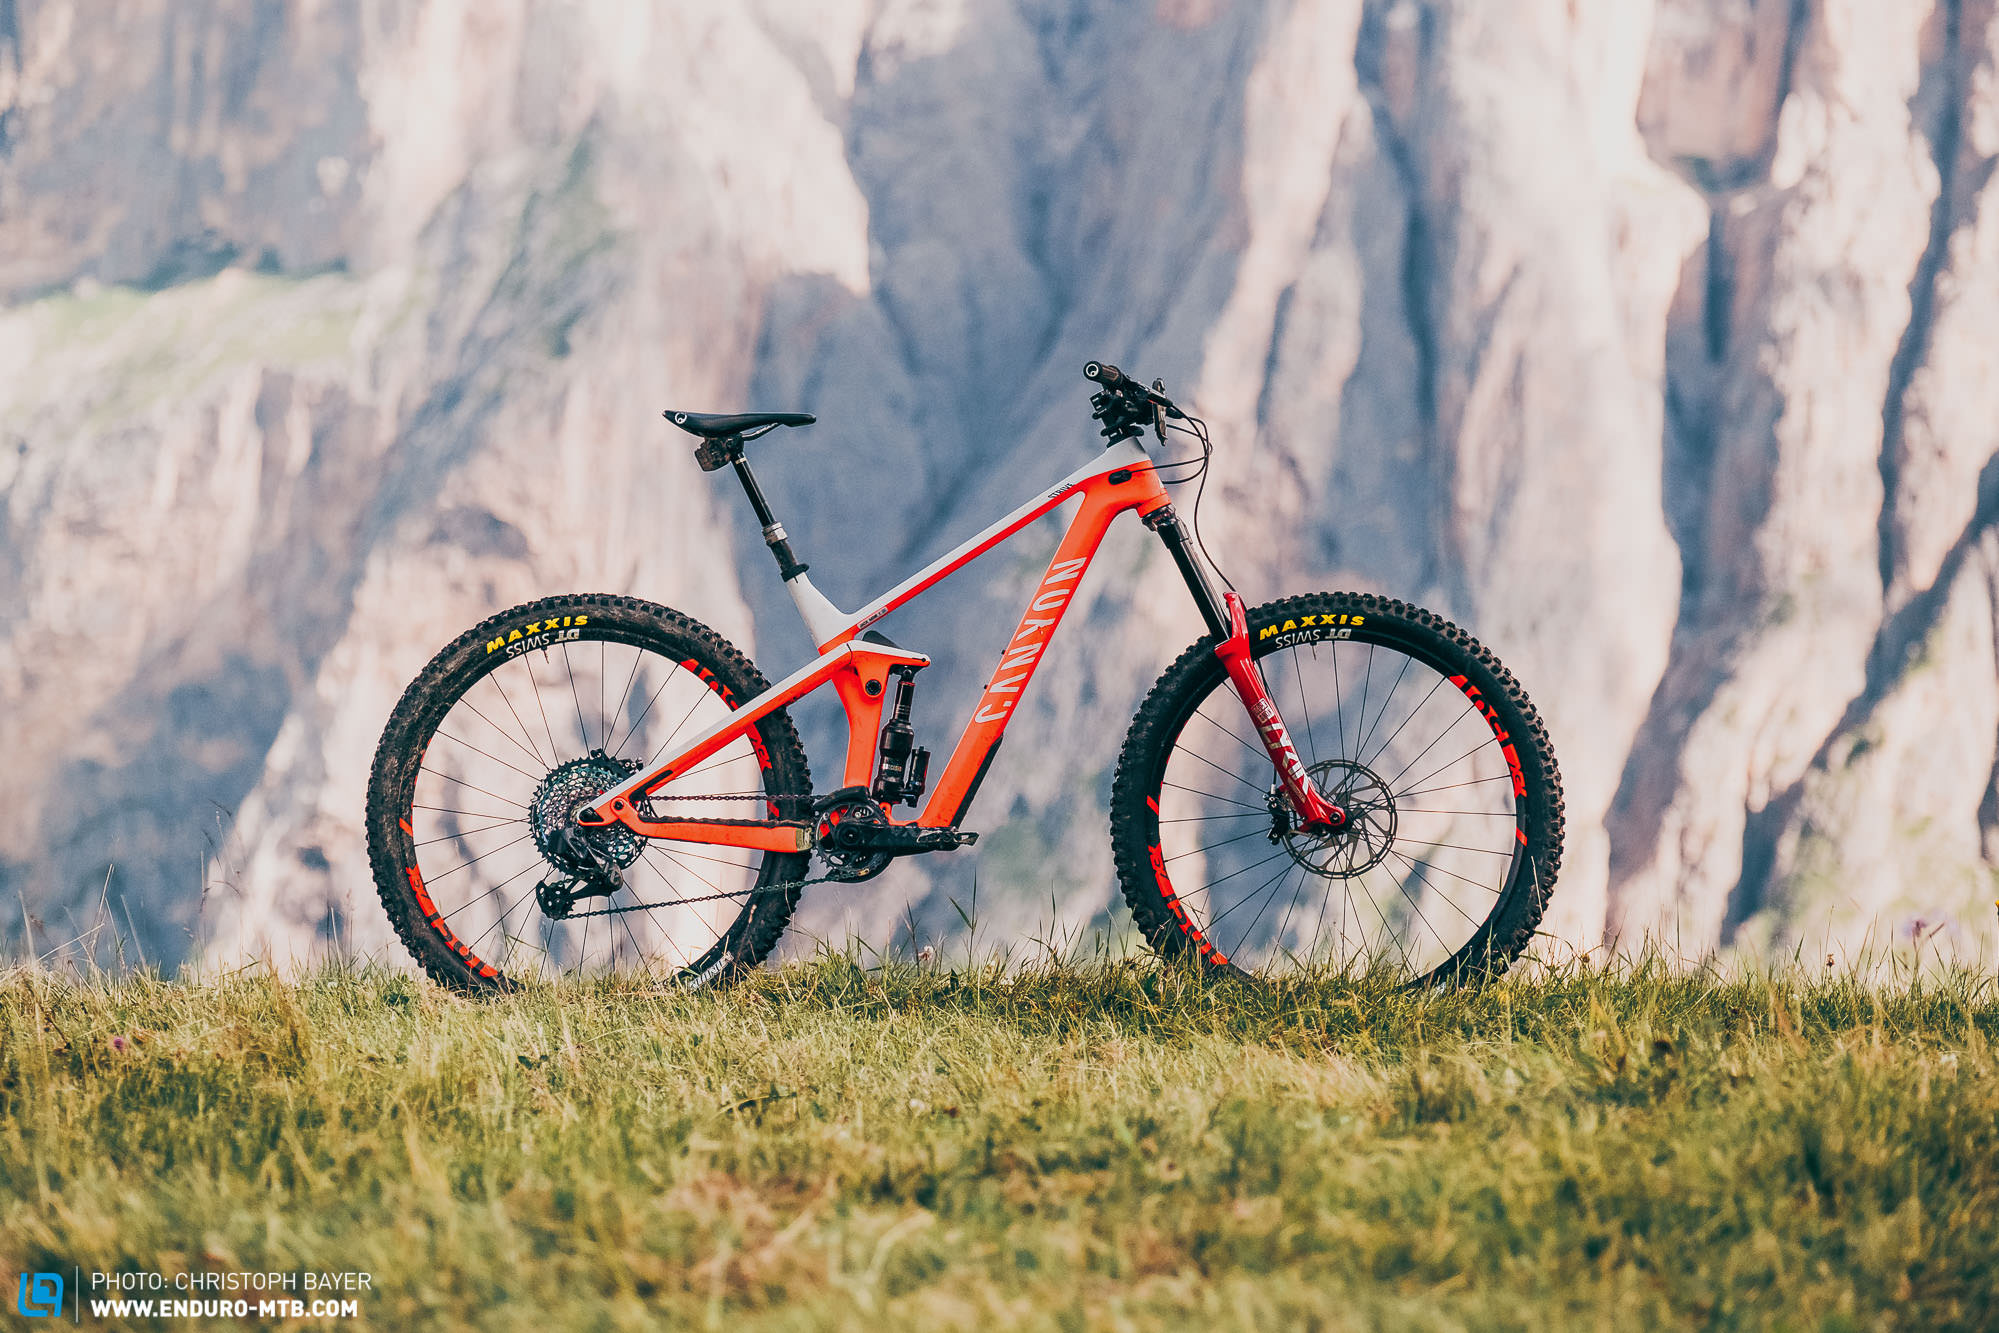 Canyon Strive CFR Jack Moir Edition review – Racing machine and all-round bullet